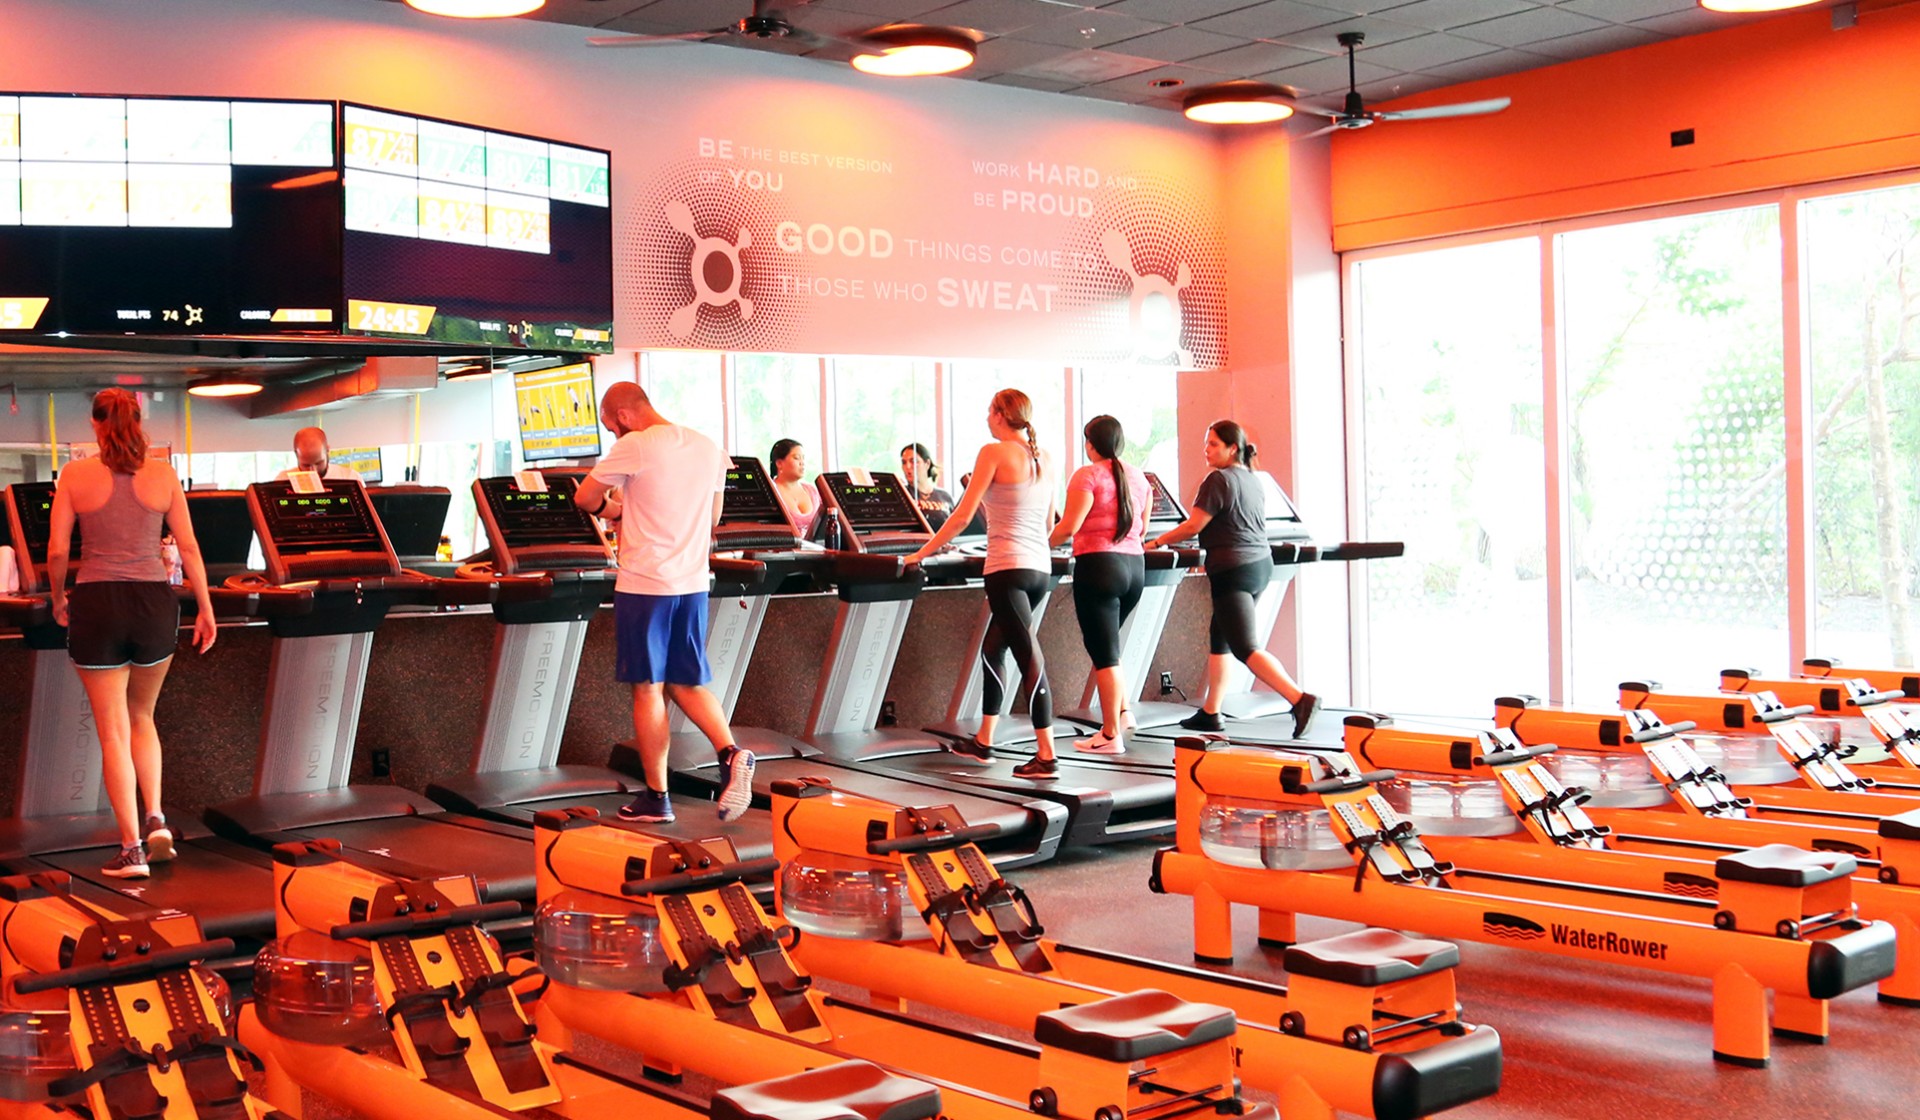 Another OrangeTheory Fitness studio coming to central Pa. 